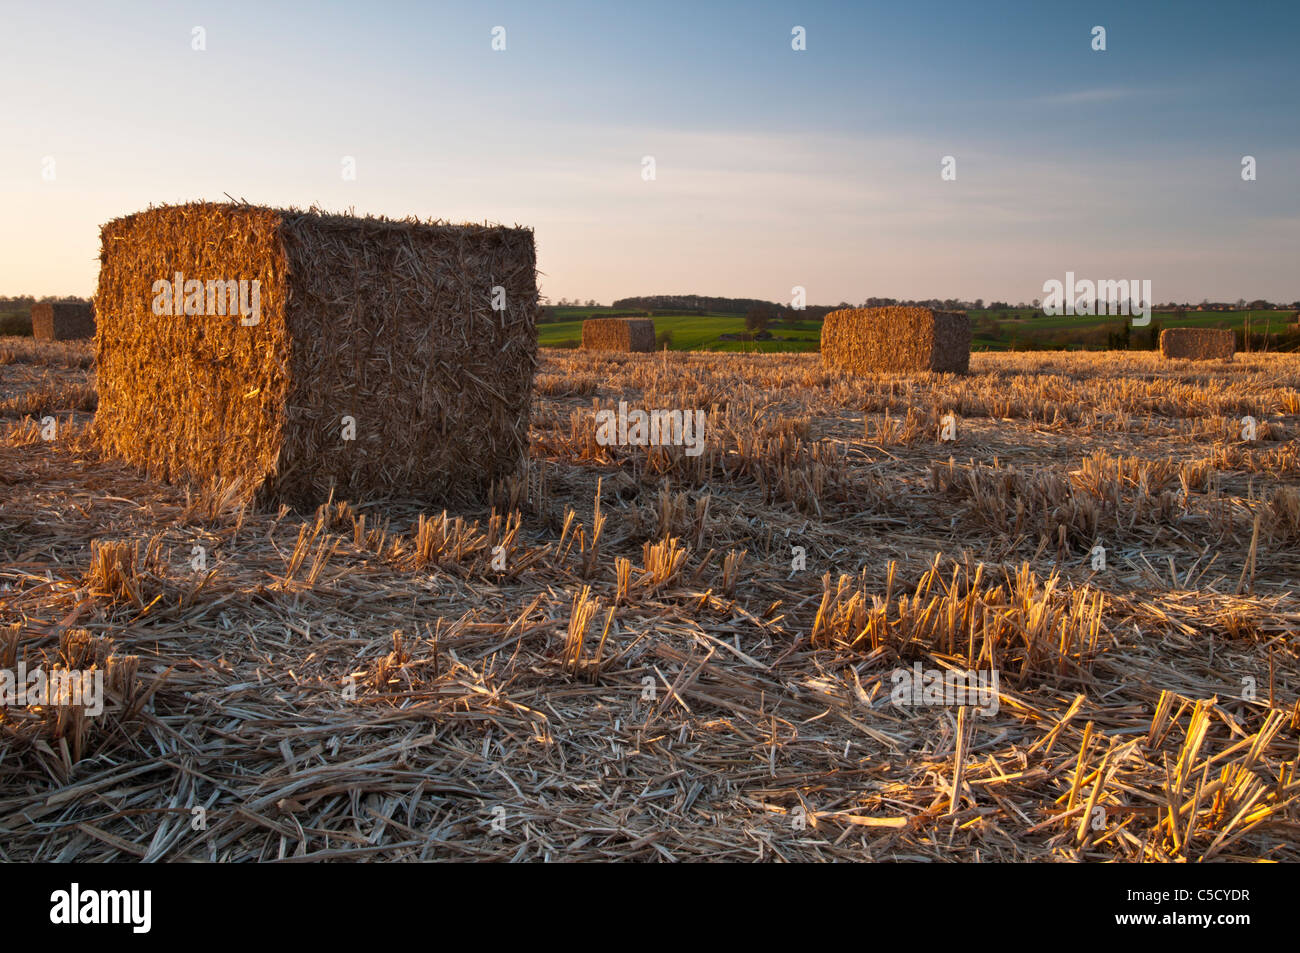 Golden late evening sun catches a field of large harvested bales of Elephant Grass (Miscanthus) near Ravensthorpe, Northamptonshire, England Stock Photo